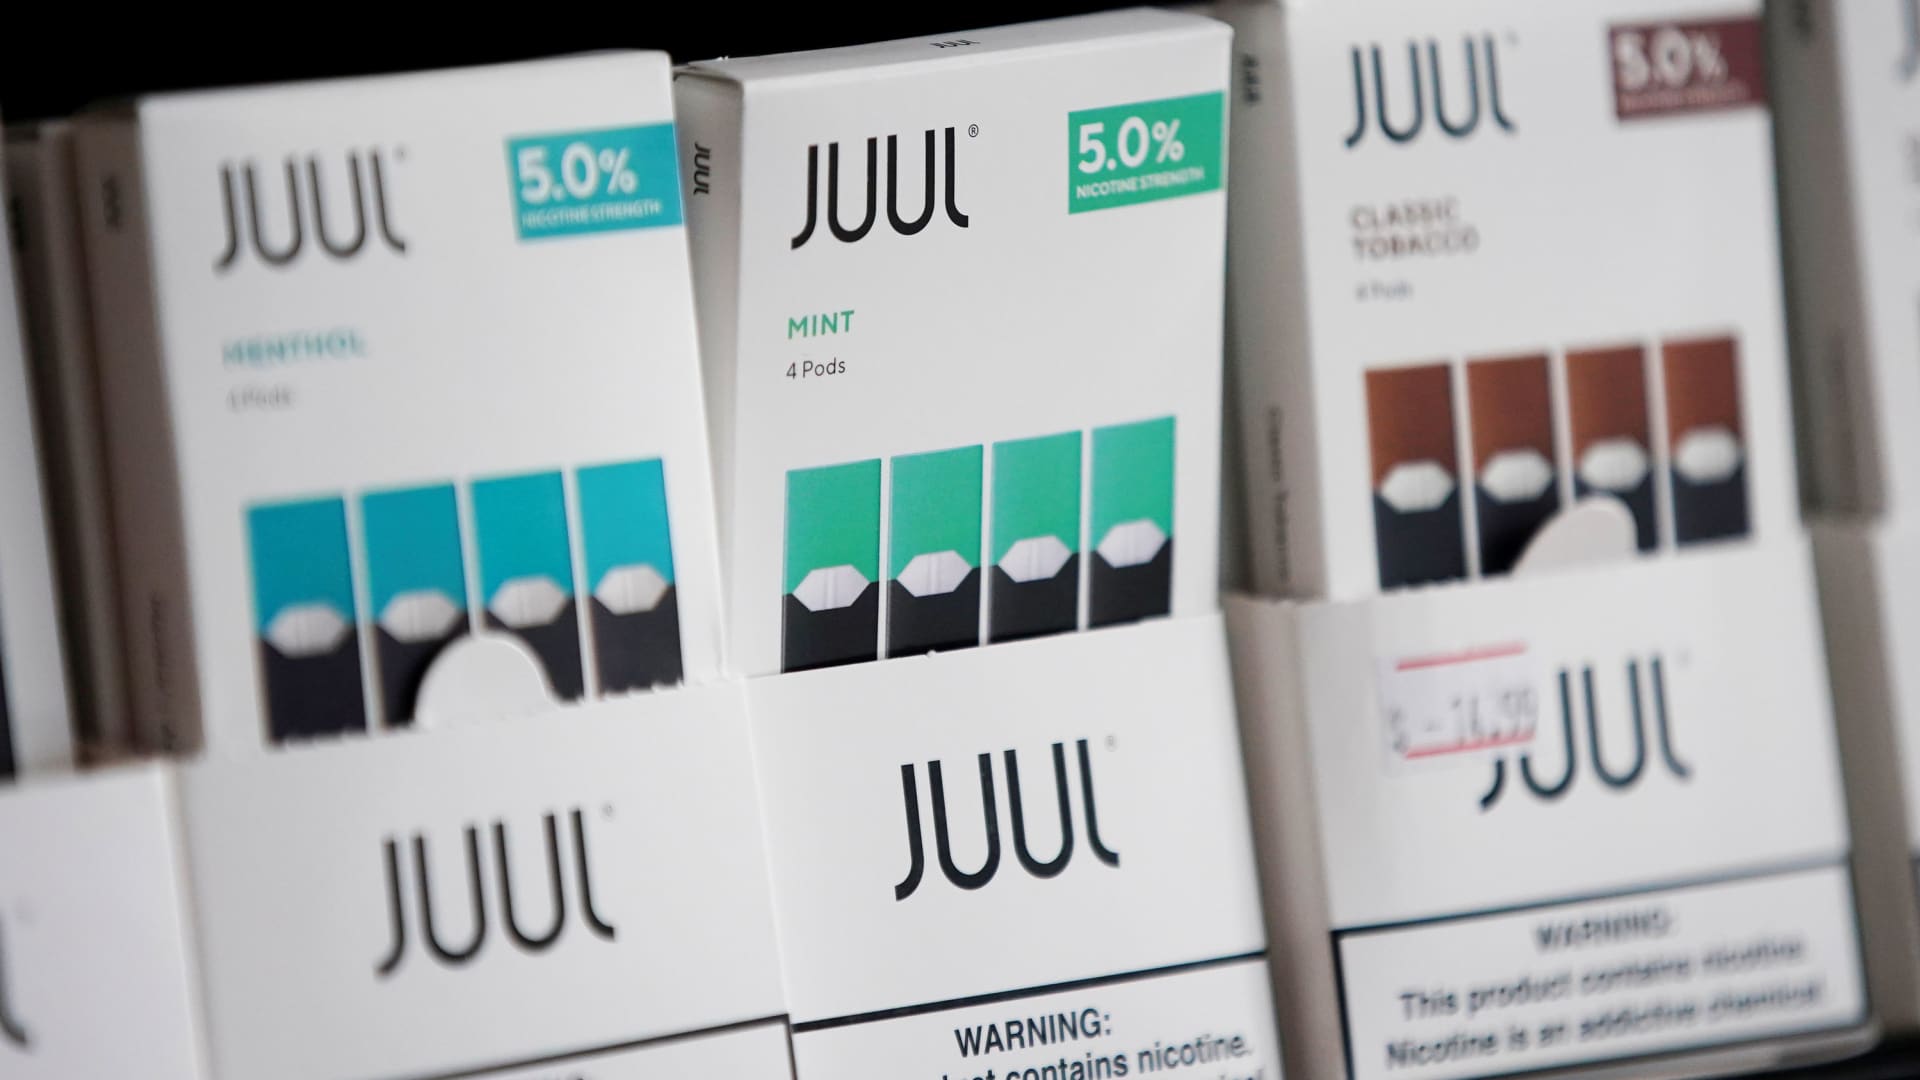 Juul to pay 2 million to settle youth vaping claims from six states, D.C.